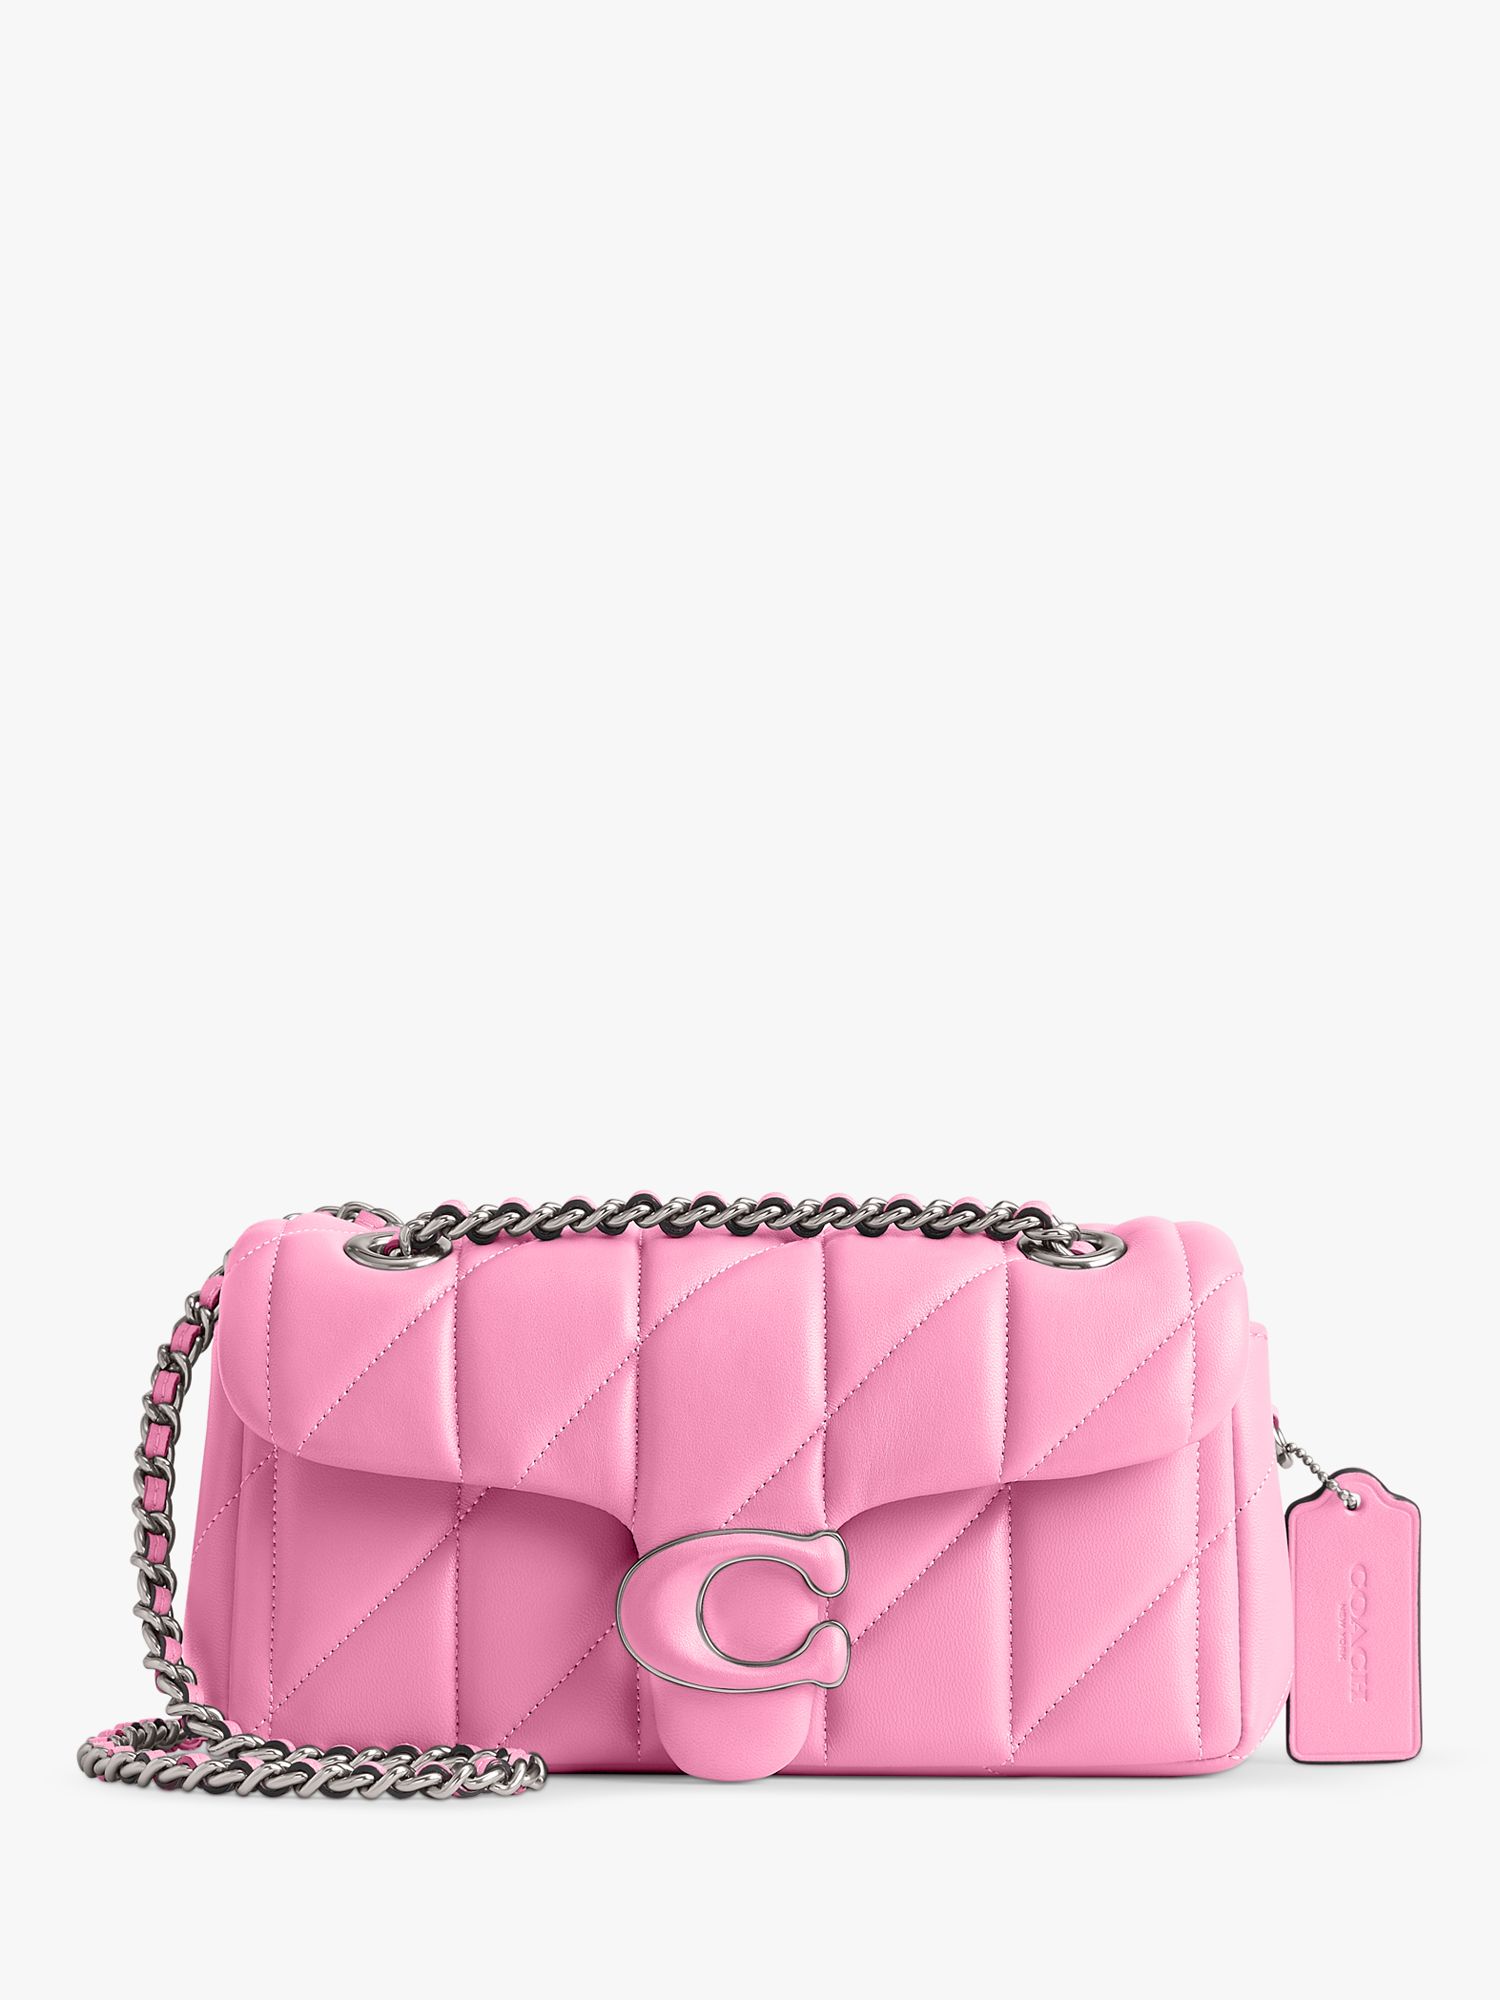 Coach Tabby 20 Quilted Leather Chain Strap Cross Body Bag, Vivid Pink ...